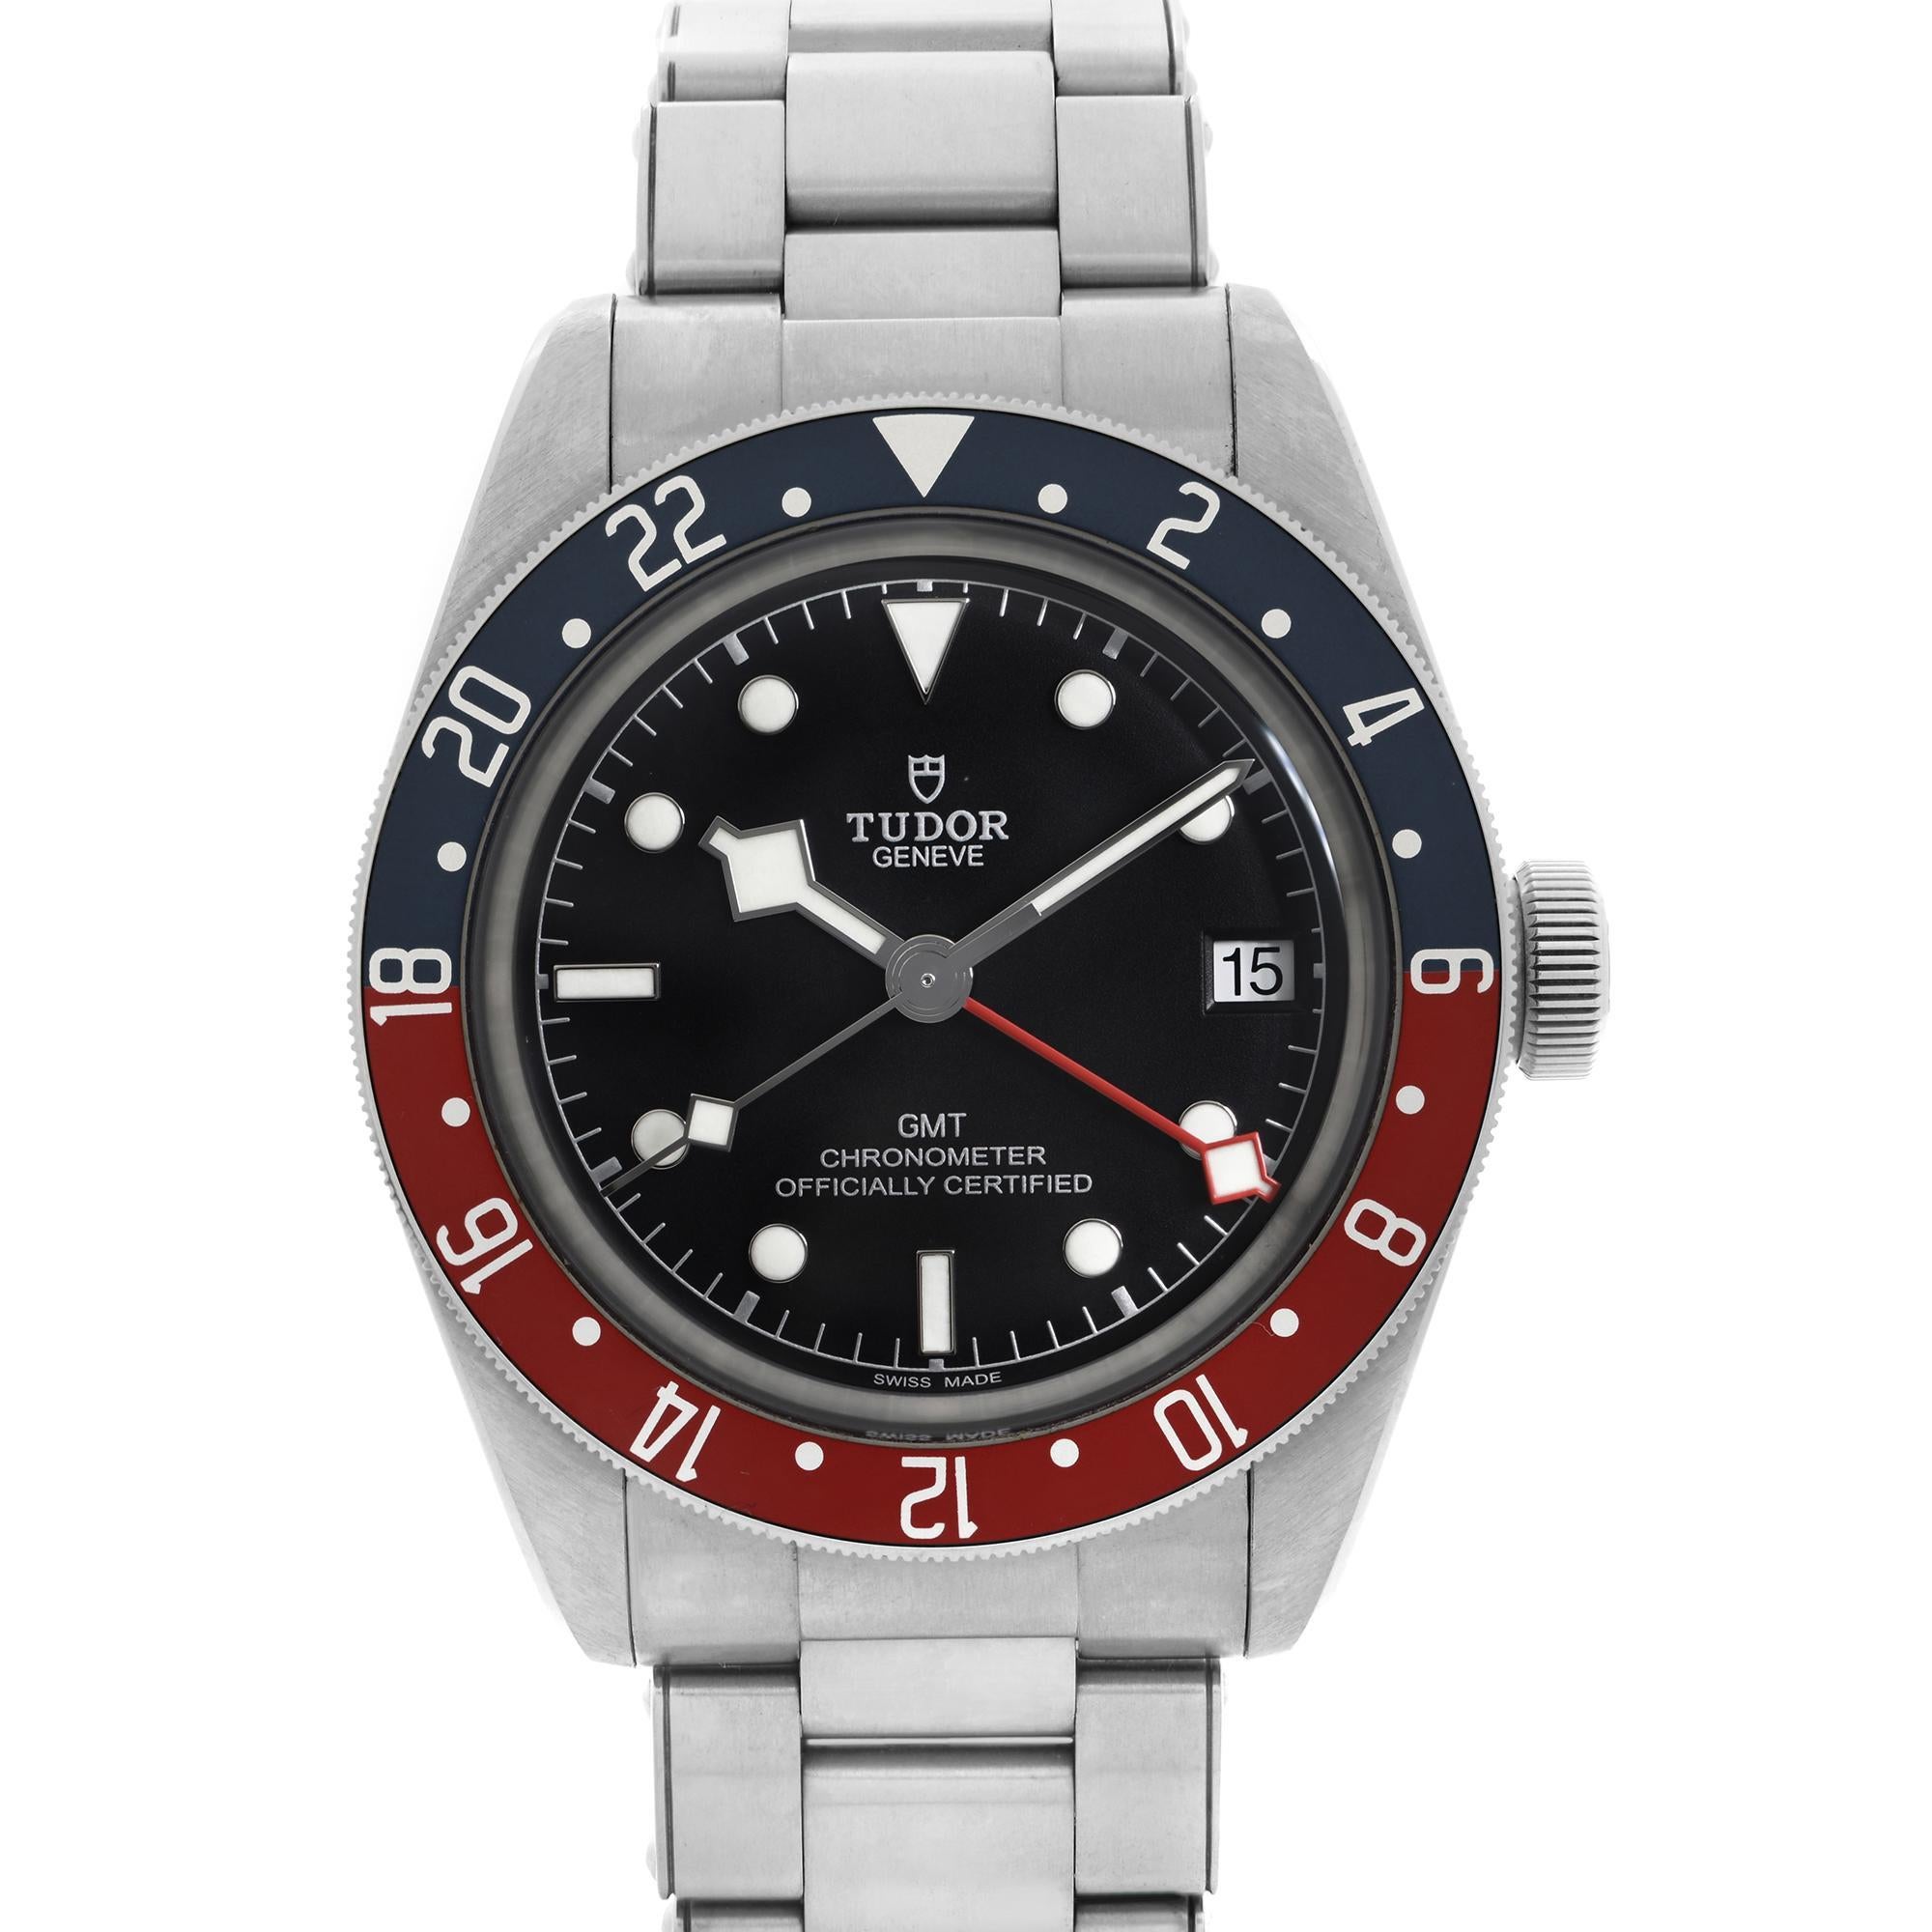 Display Model Tudor Heritage Black Bay GMT Stainless Steel Automatic Men's Watch M79830RB-0001. This Beautiful Men's Timepiece is Powered By a Mechanical (Automatic) Movement and Features: Stainless Steel Case with a Stainless Steel Bracelet,